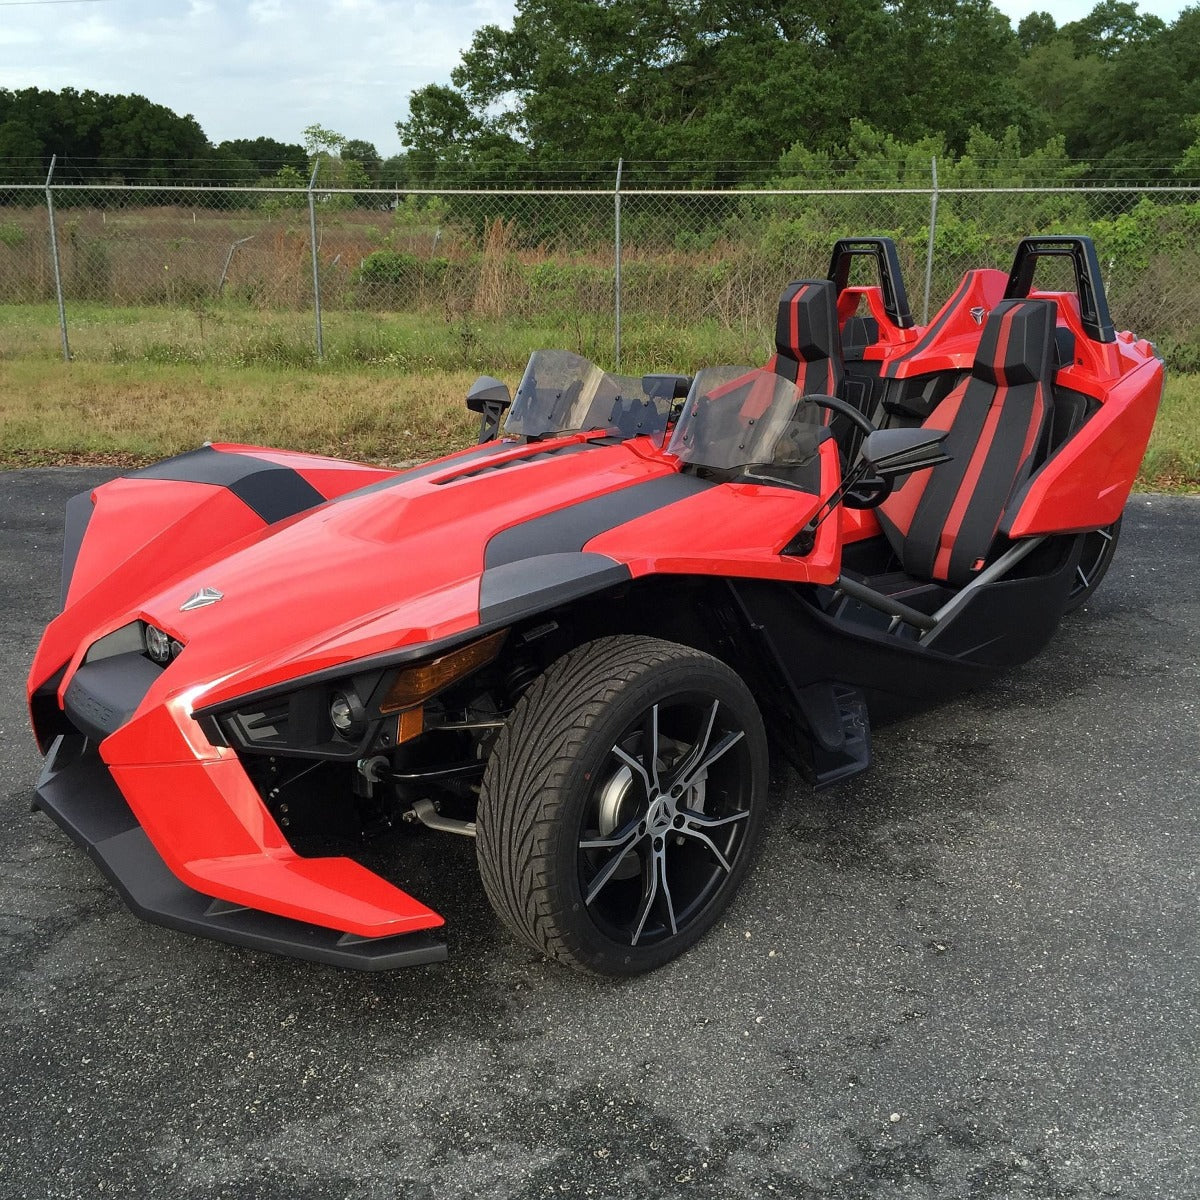 MADSTAD ENGINEERING 10" DUAL DOUBLE BUBBLE WINDSHIELD SYSTEM FOR THE POLARIS SLINGSHOT (2015-2019)